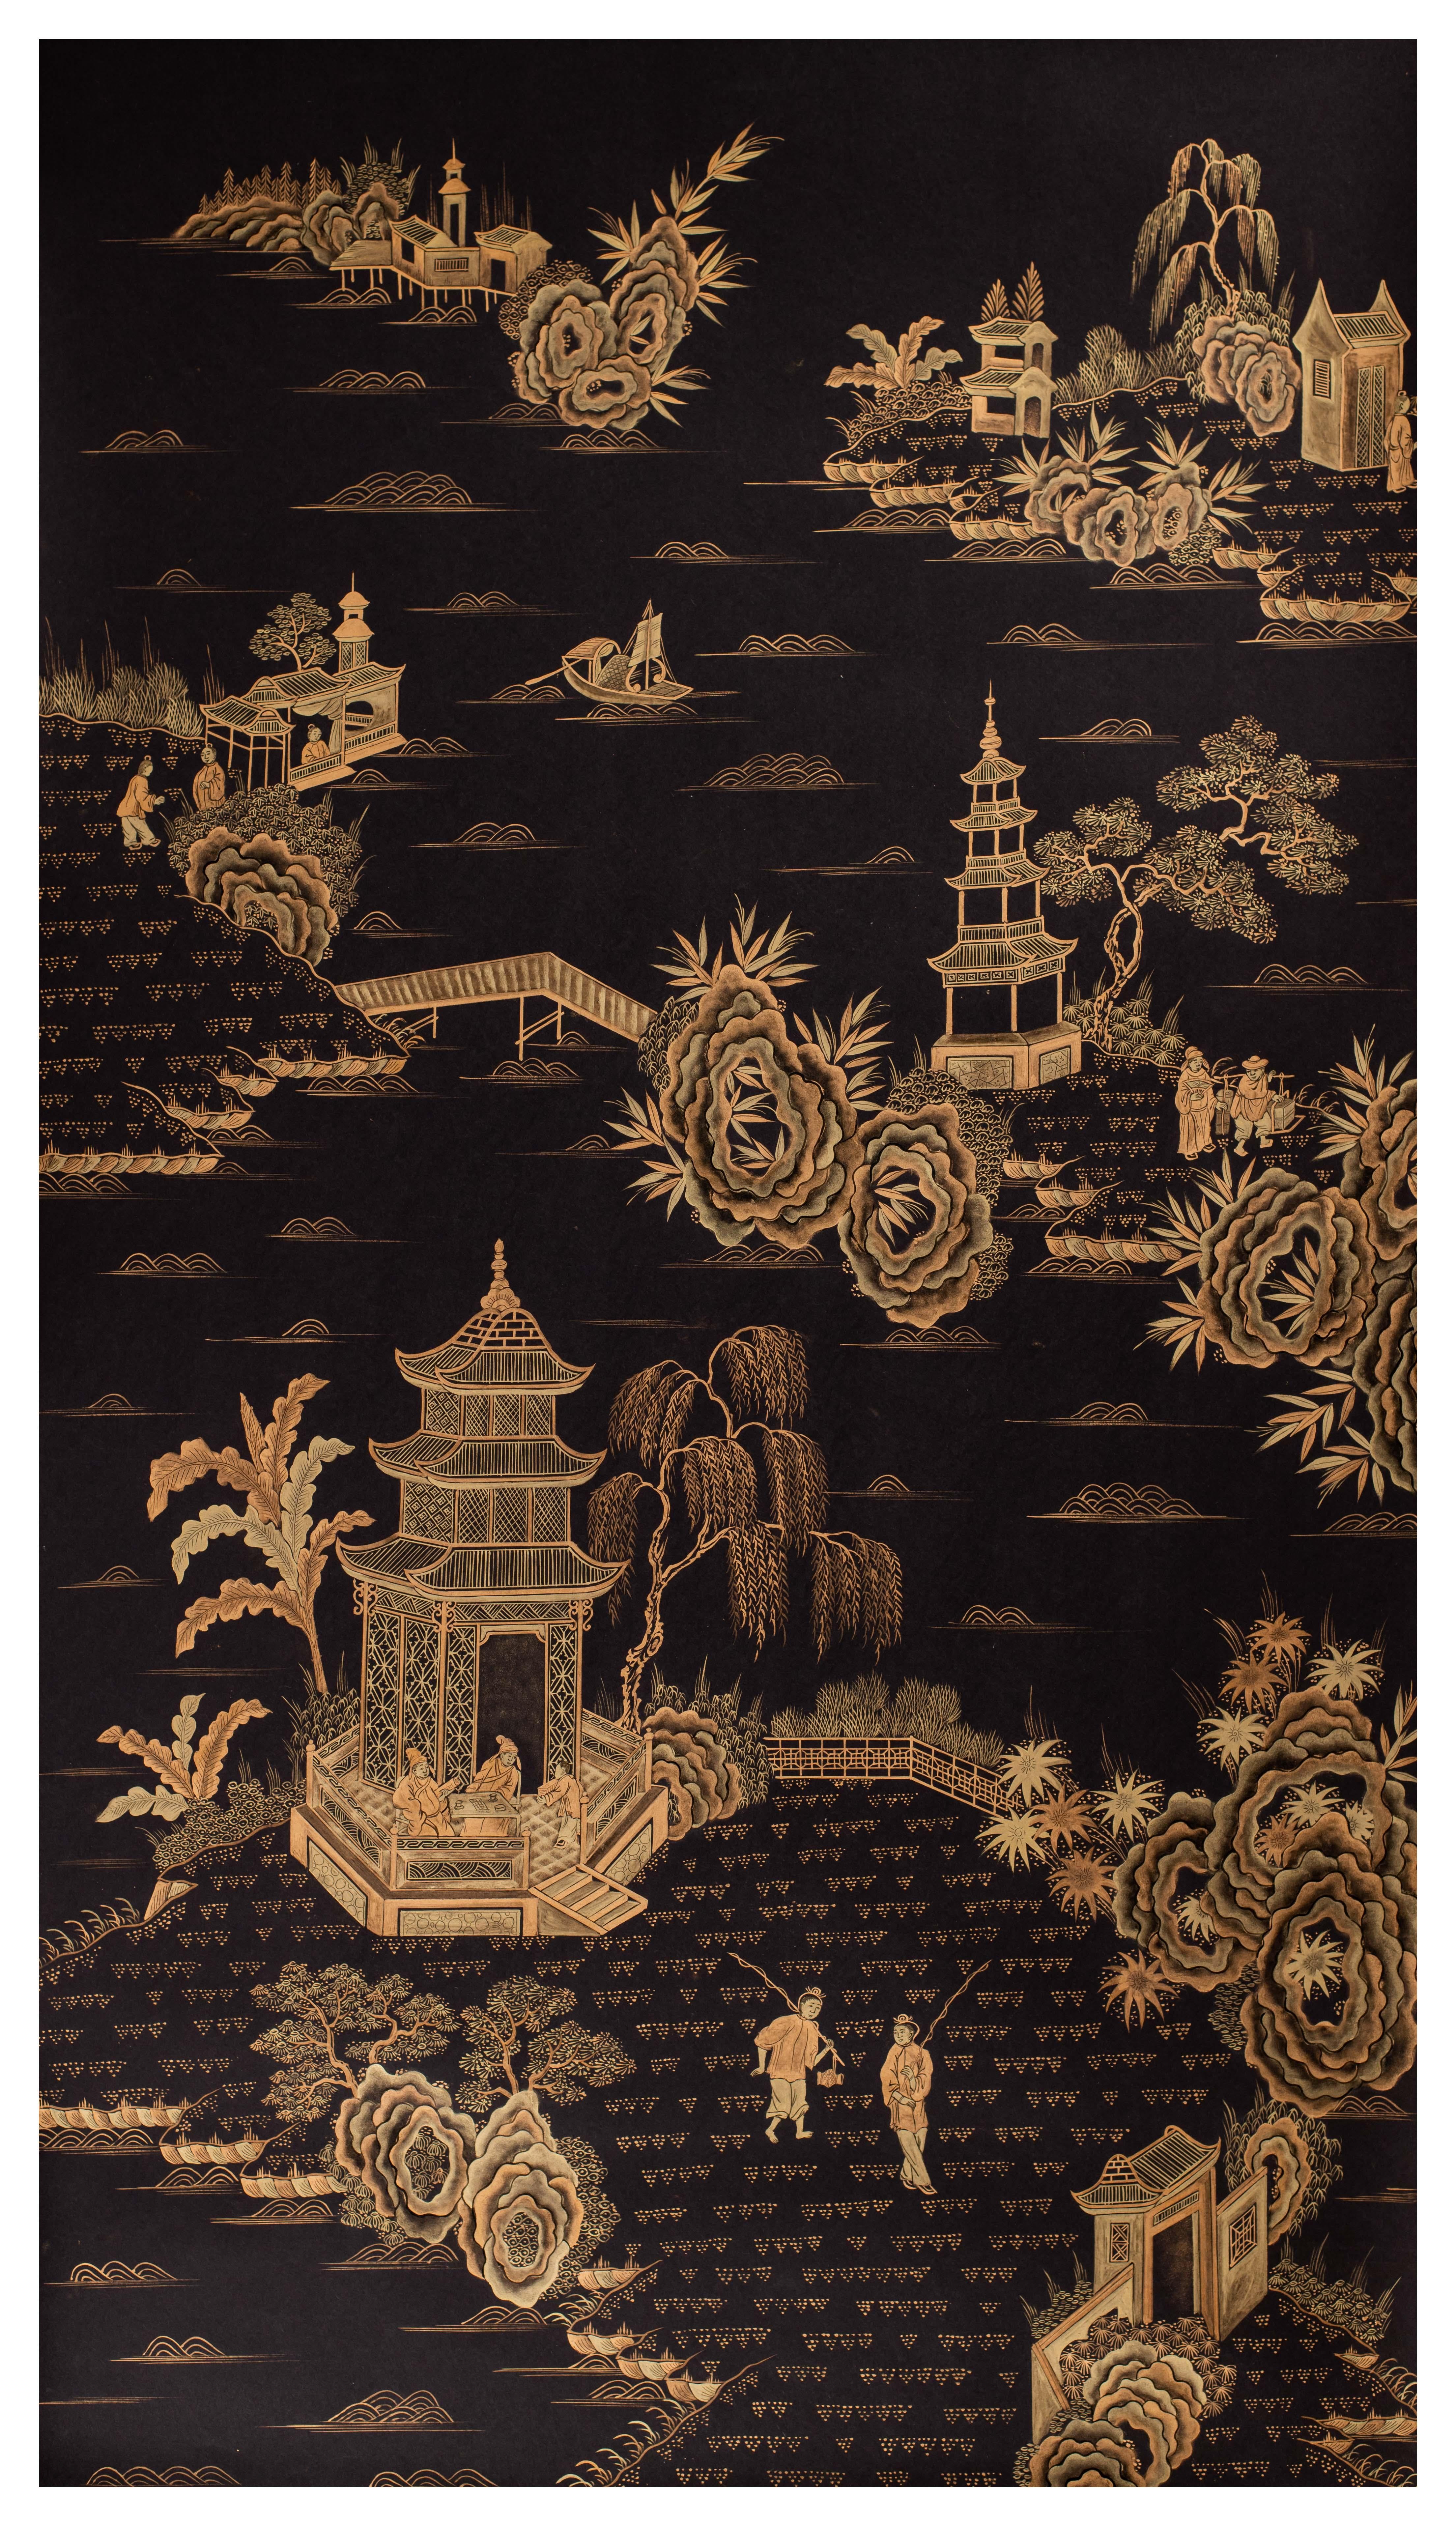 The fine pair of wallpaper panels was hand-painted in gilt paint on rice paper, reproducing the 19th century Chinese export chinoiserie painting of golden pavilions on export wallpaper, from our studio. An antiquing process is applied to the panels